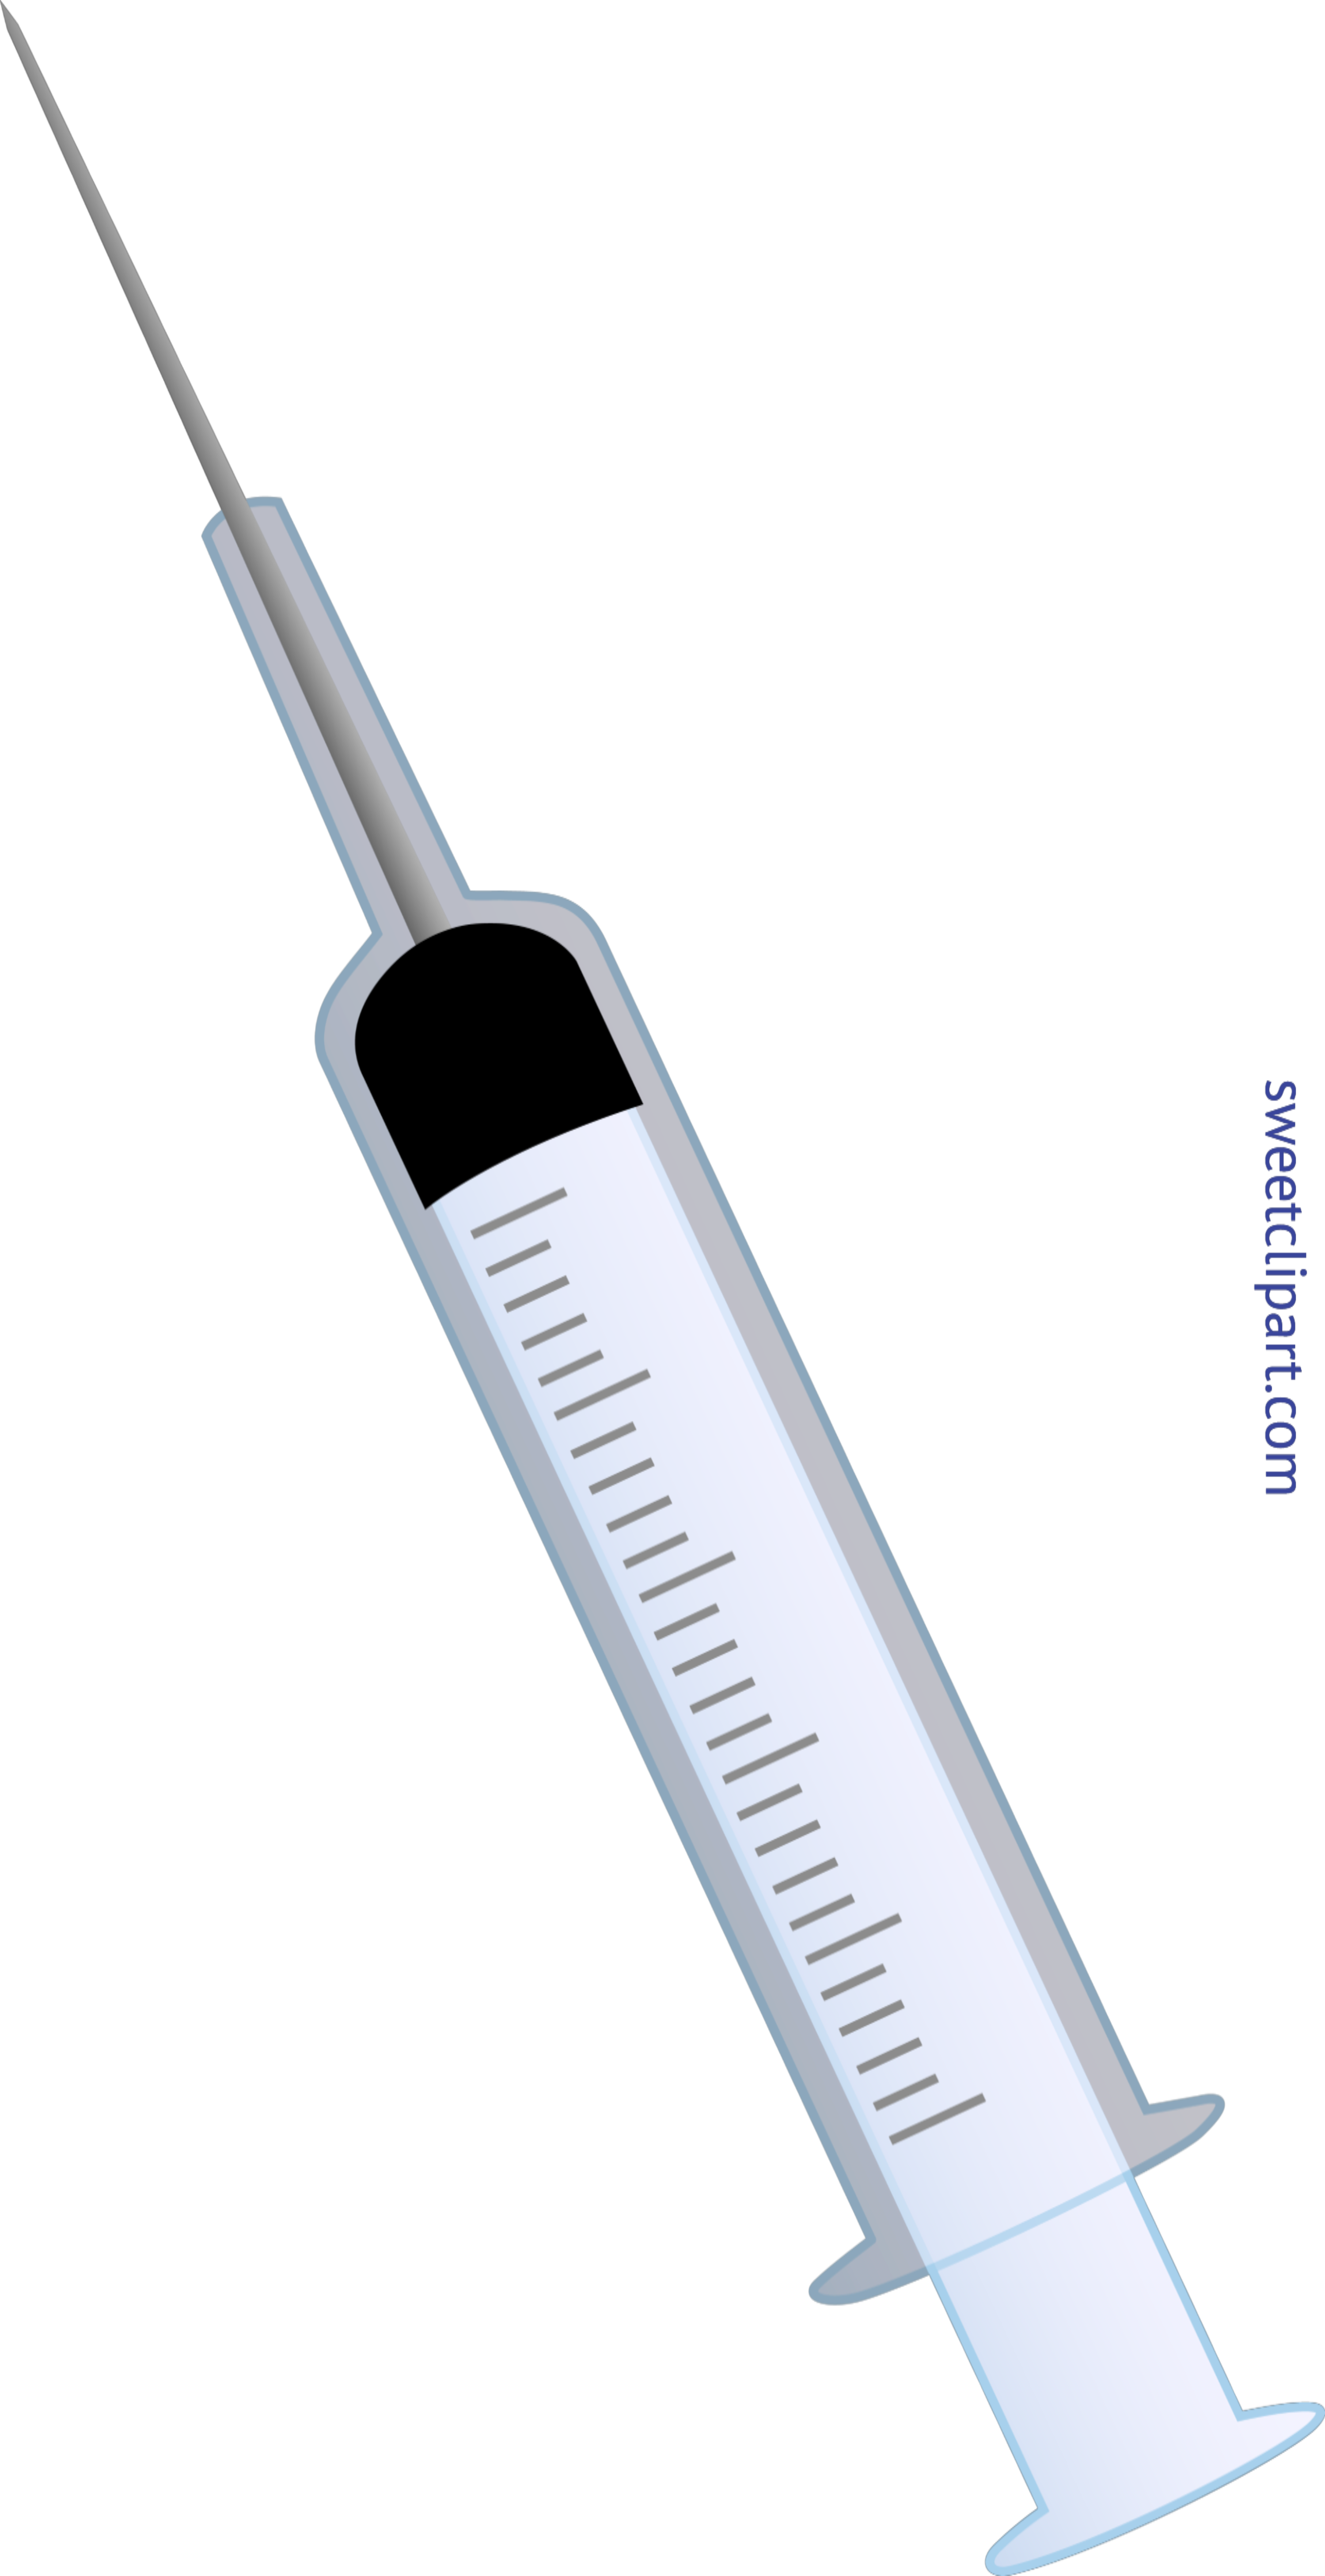 Clipart thermometer medical. Needle syringe clip art